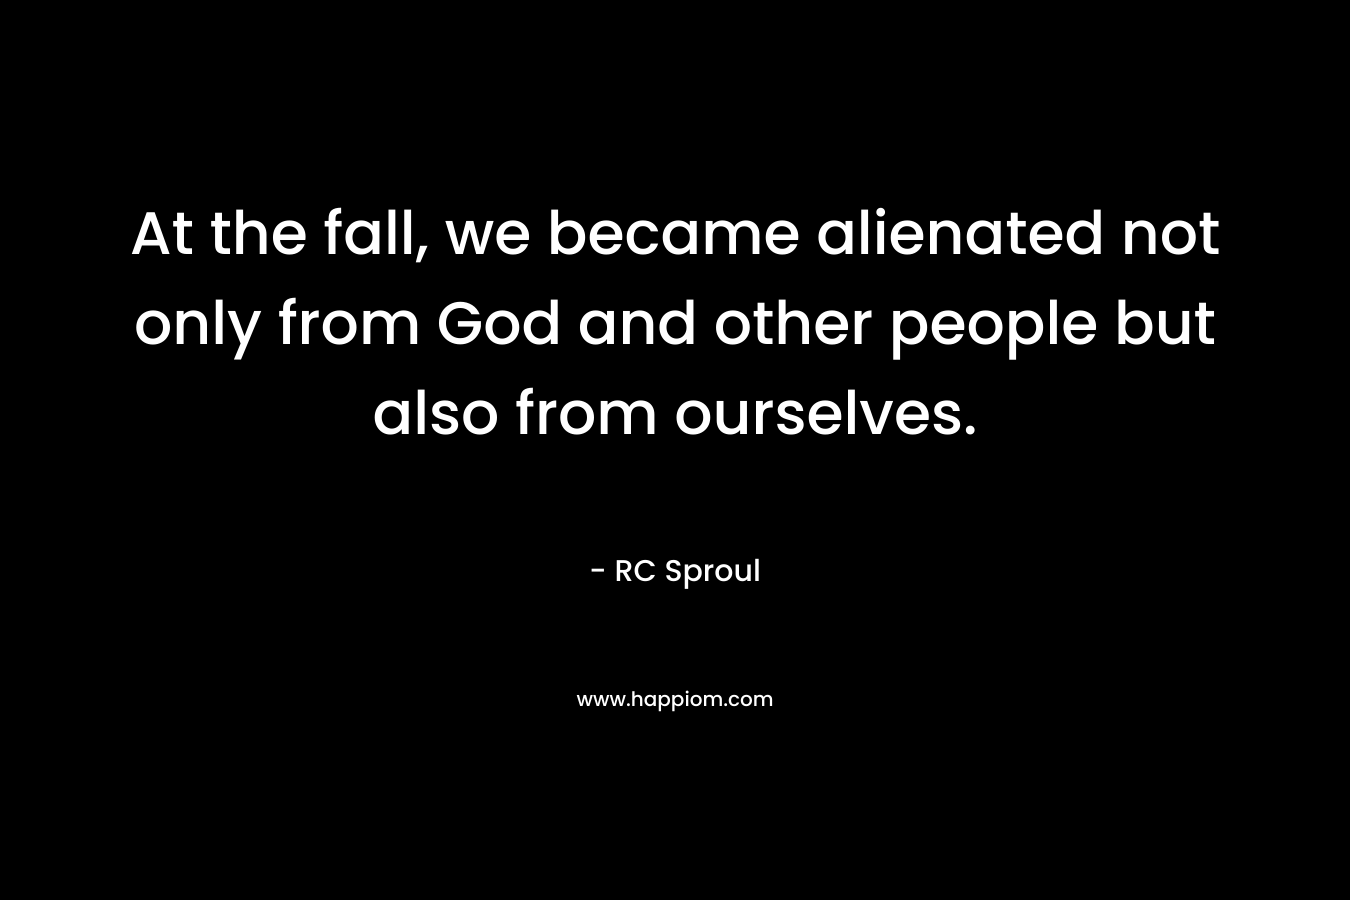 At the fall, we became alienated not only from God and other people but also from ourselves. – RC Sproul